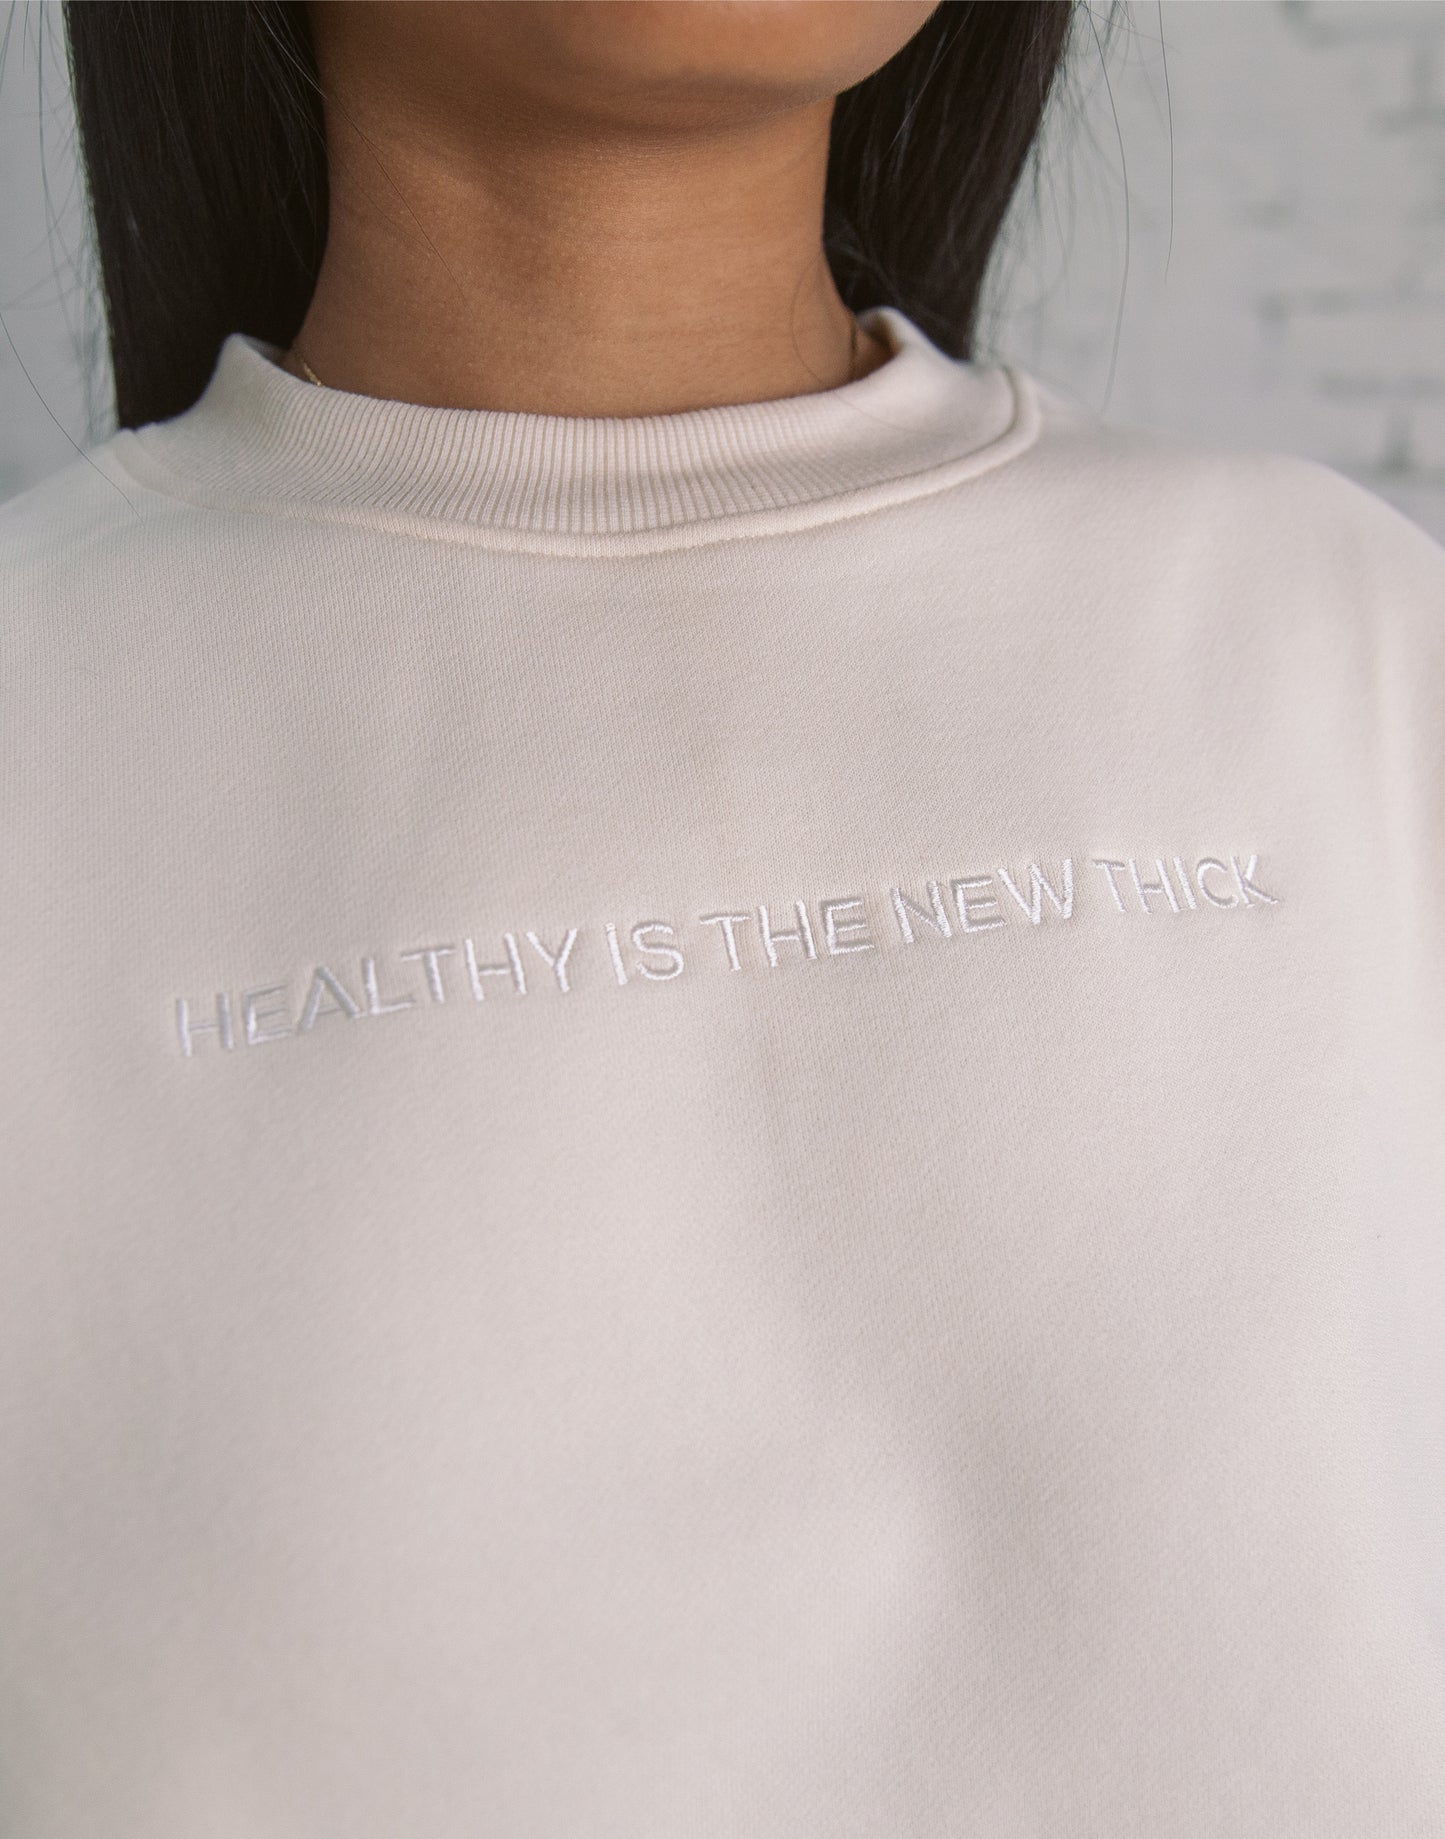 Healthy Is The New Thick Sweatshirt | Acceptance